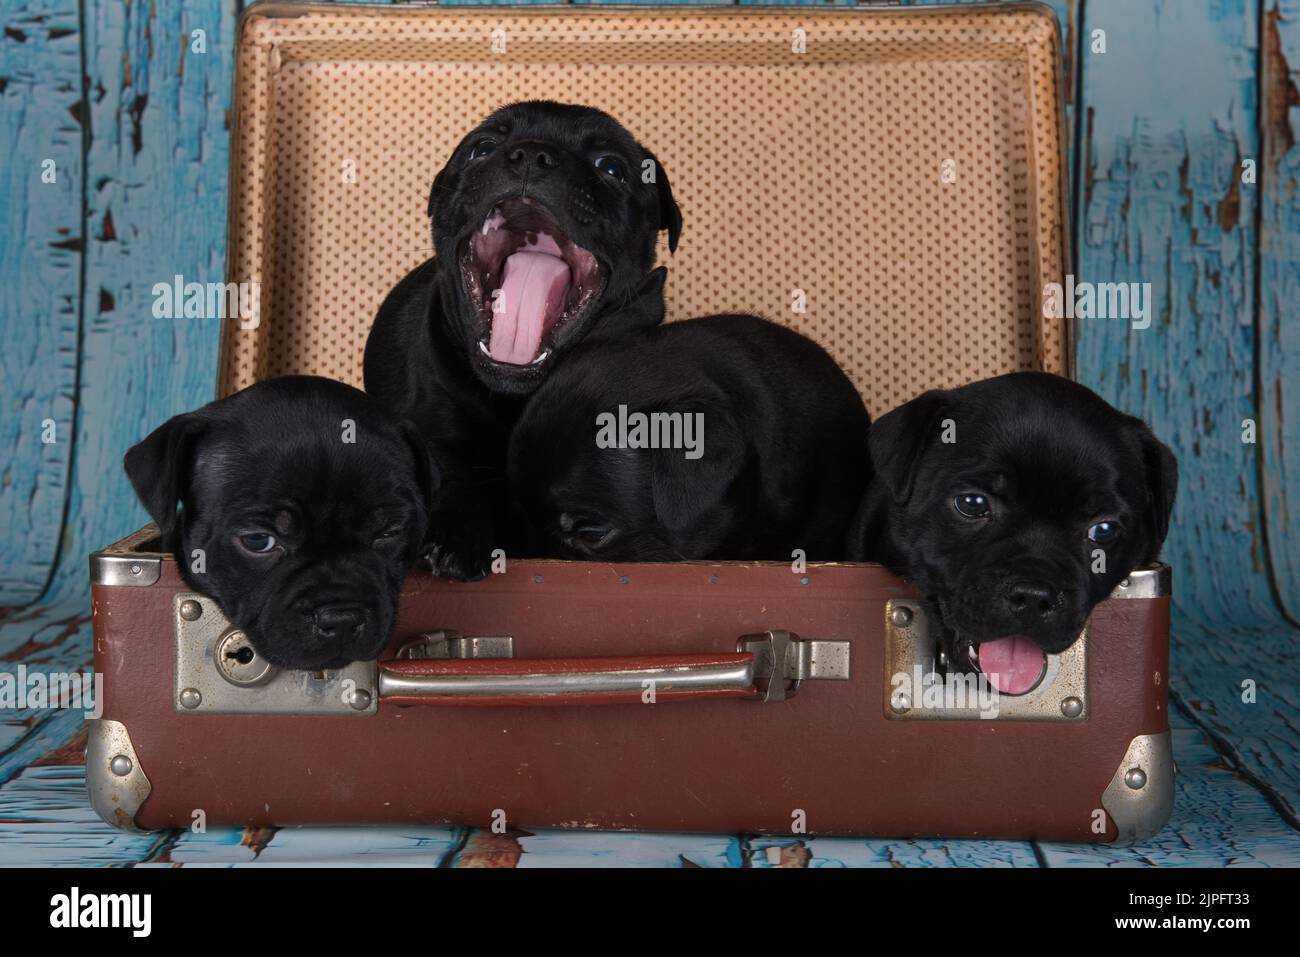 Black American Staffordshire Terrier dogs or AmStaff puppies in a retro suitcase on blue background Stock Photo